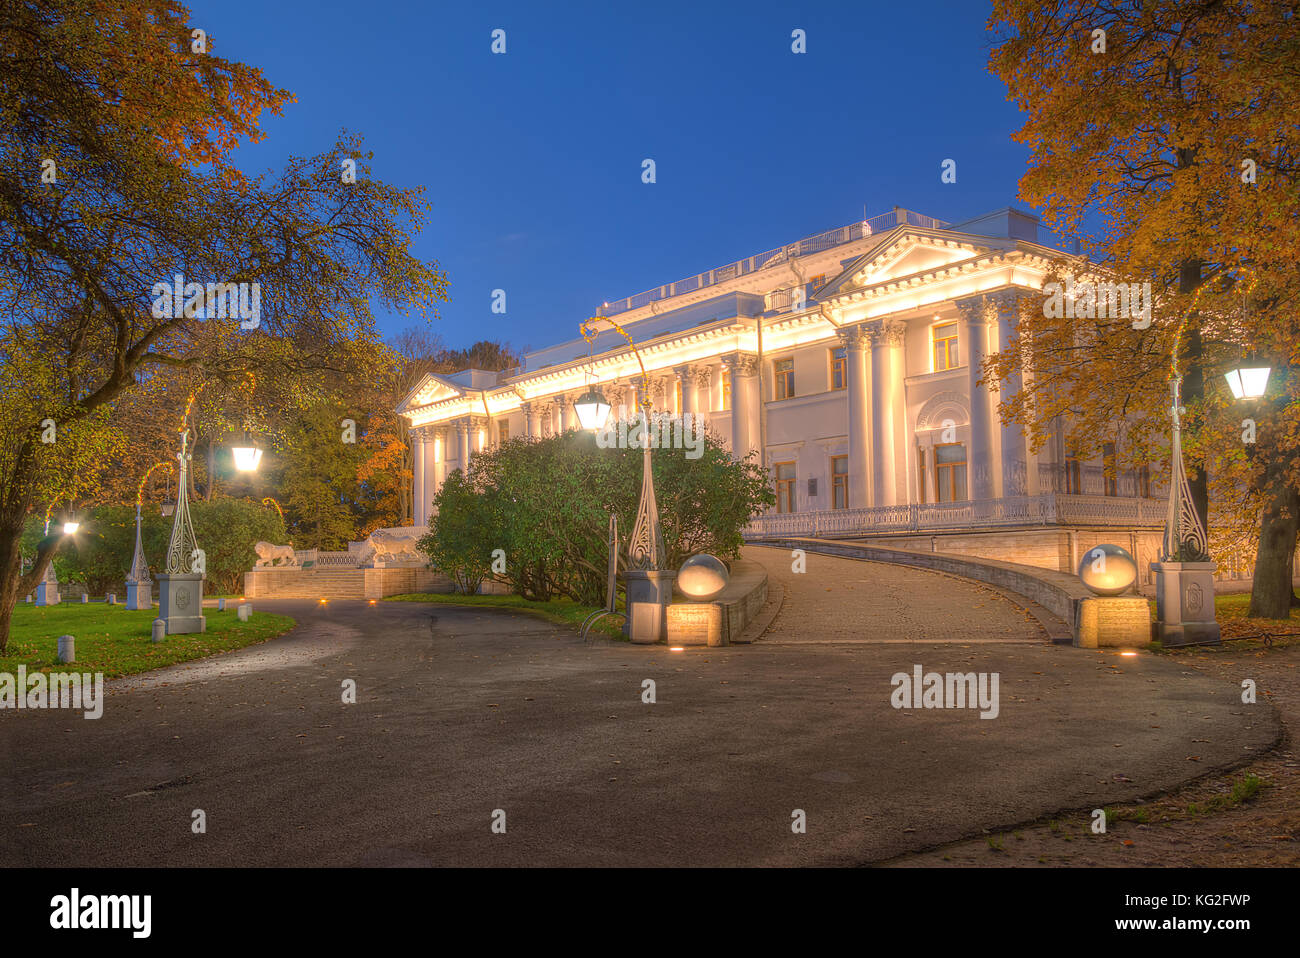 St. Petersburg, Russie - 3 octobre, 2016 : night view of illuminated yelagin palace en automne Banque D'Images